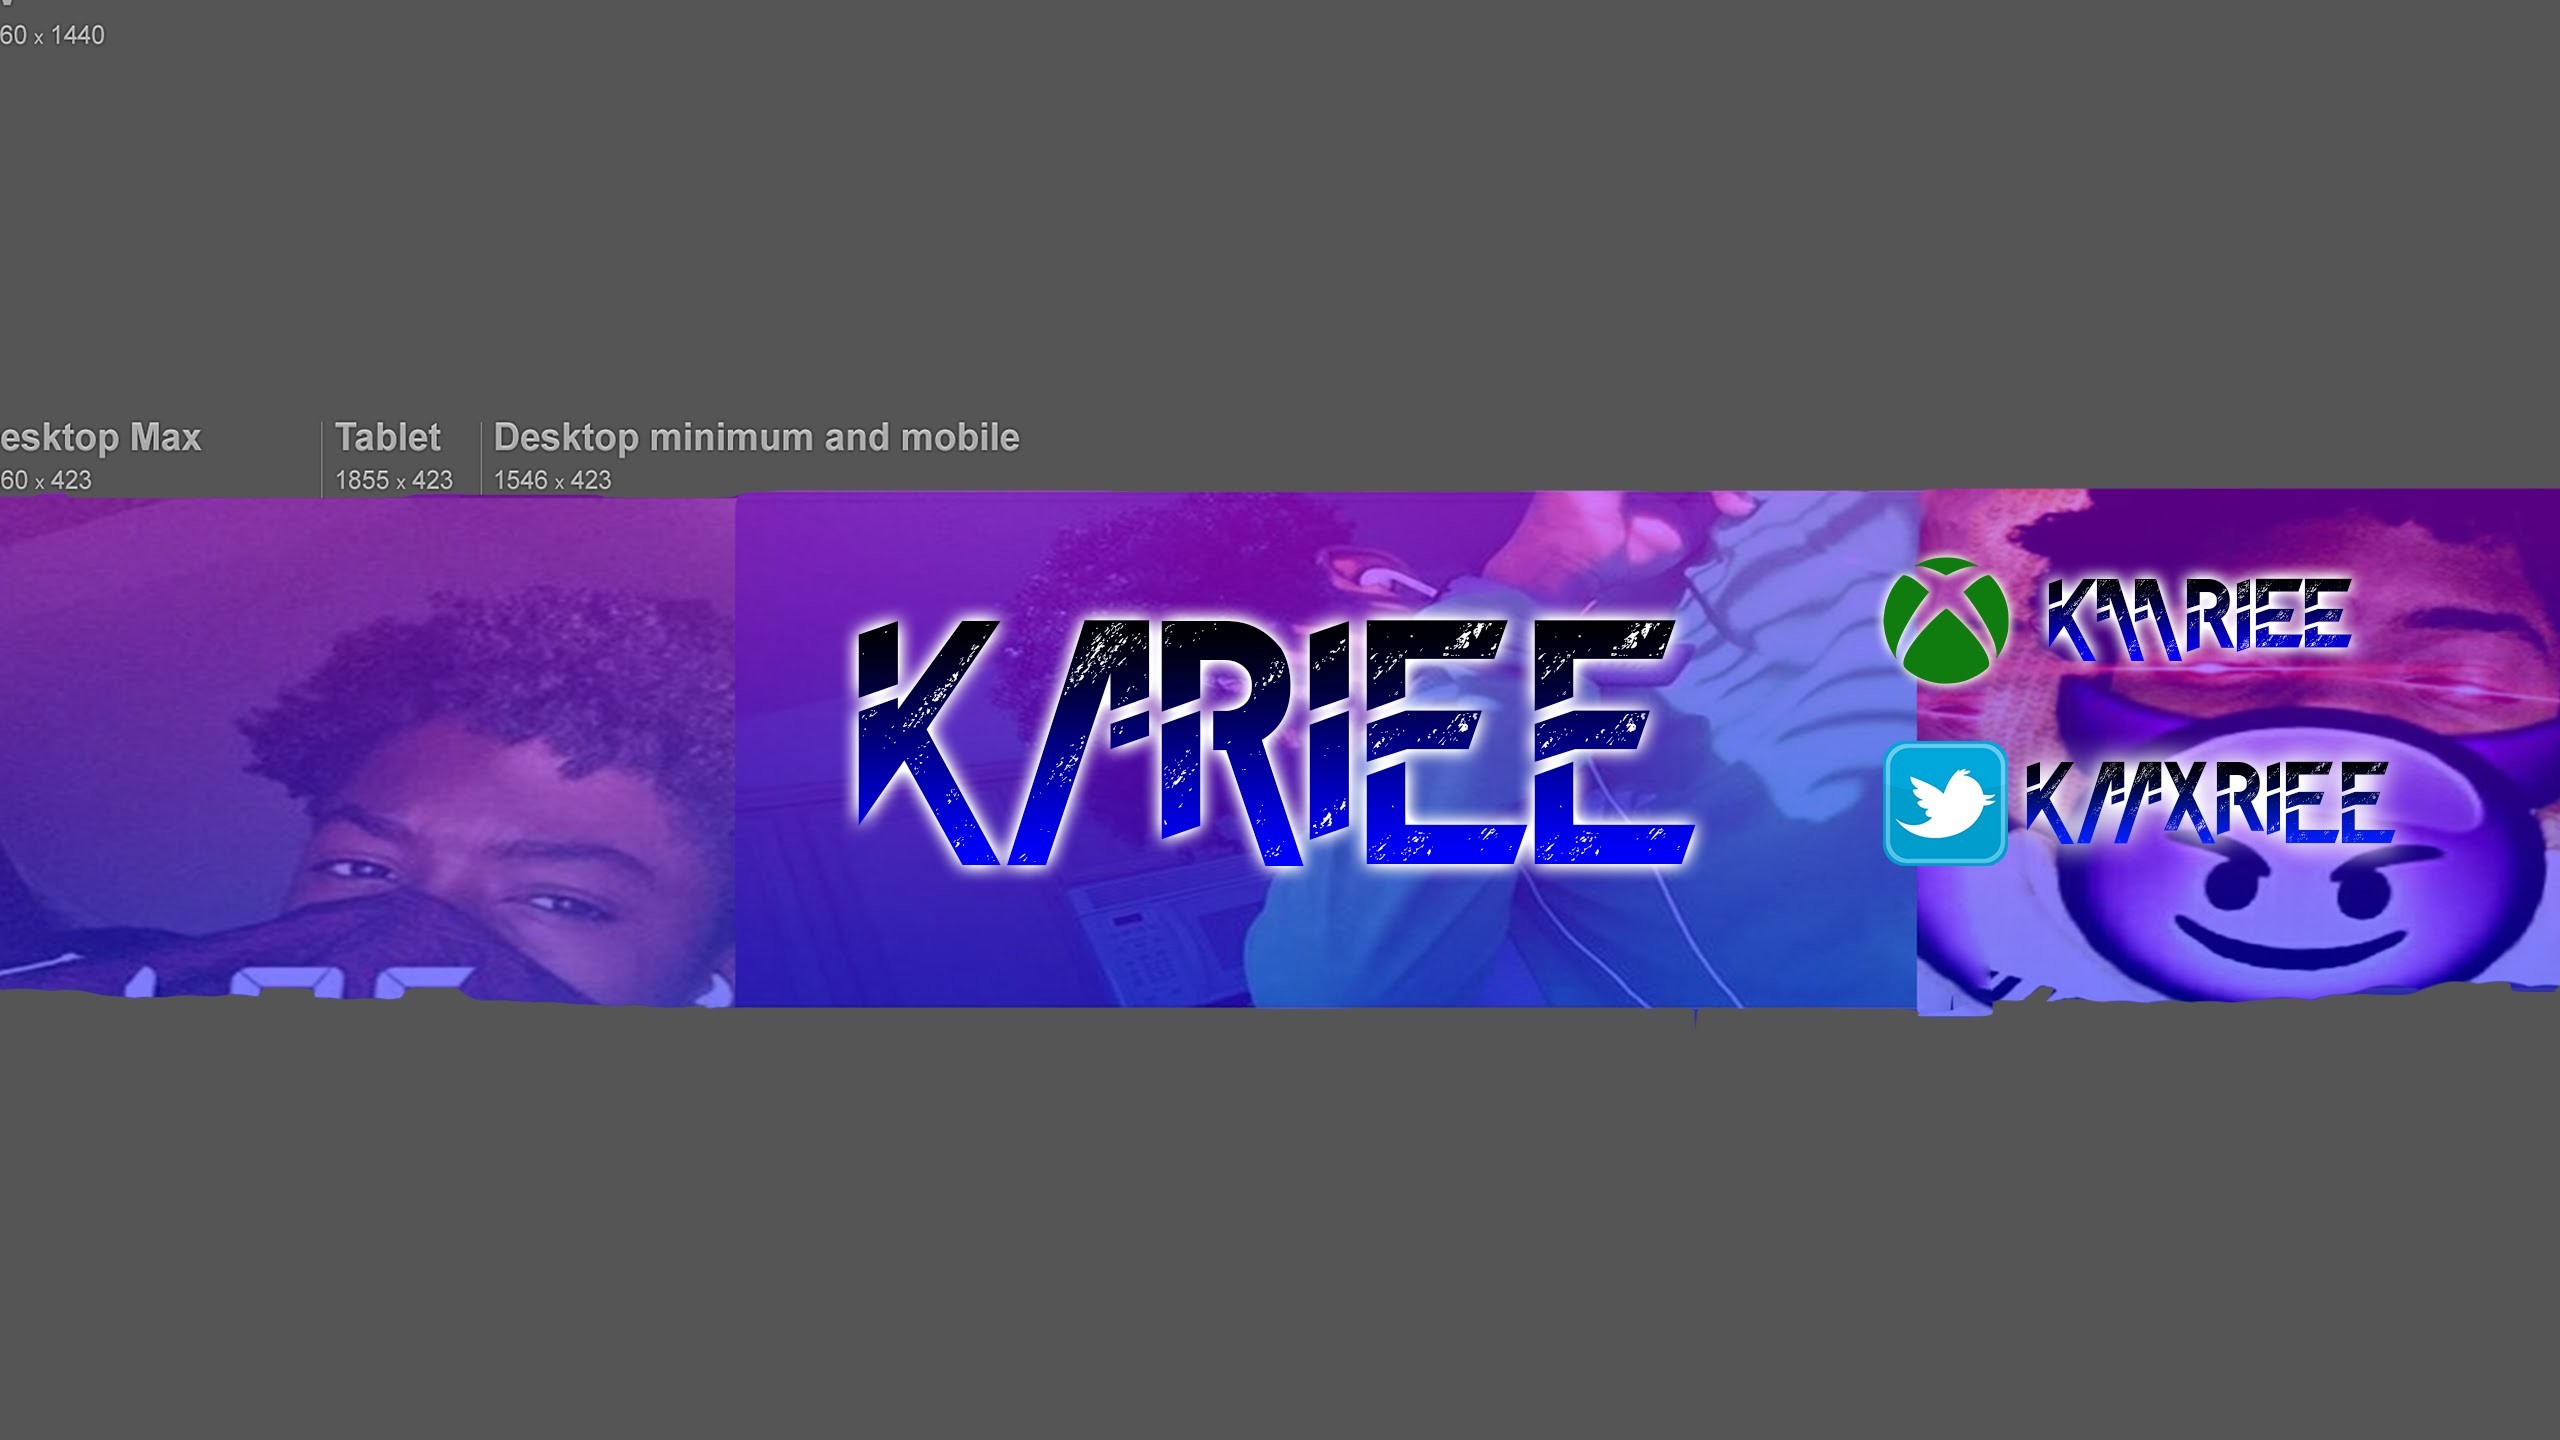 2560x1440 |Photoshop Speed Art| Banner for Kariee|#SUBSCRIBE